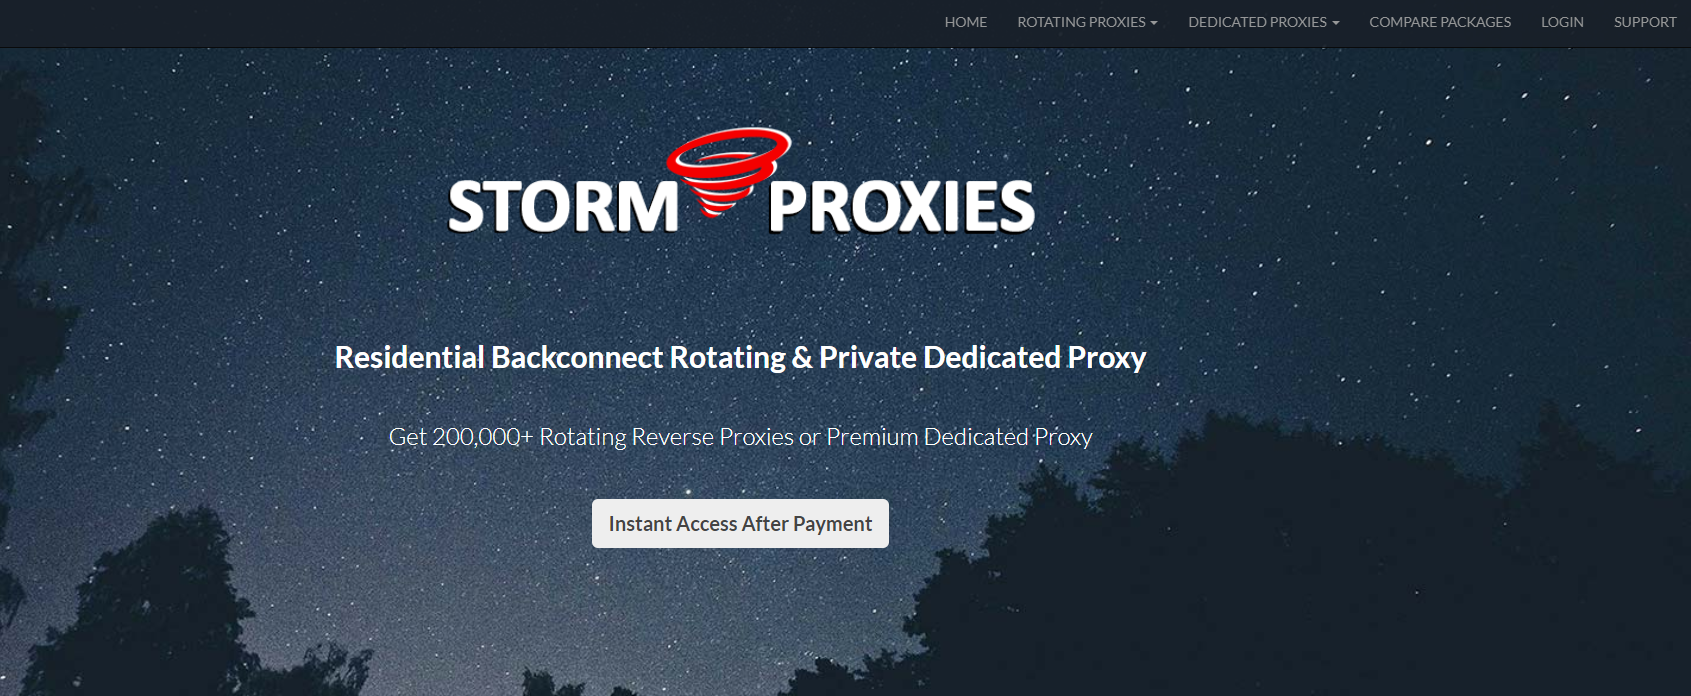 Storm Proxies Overview